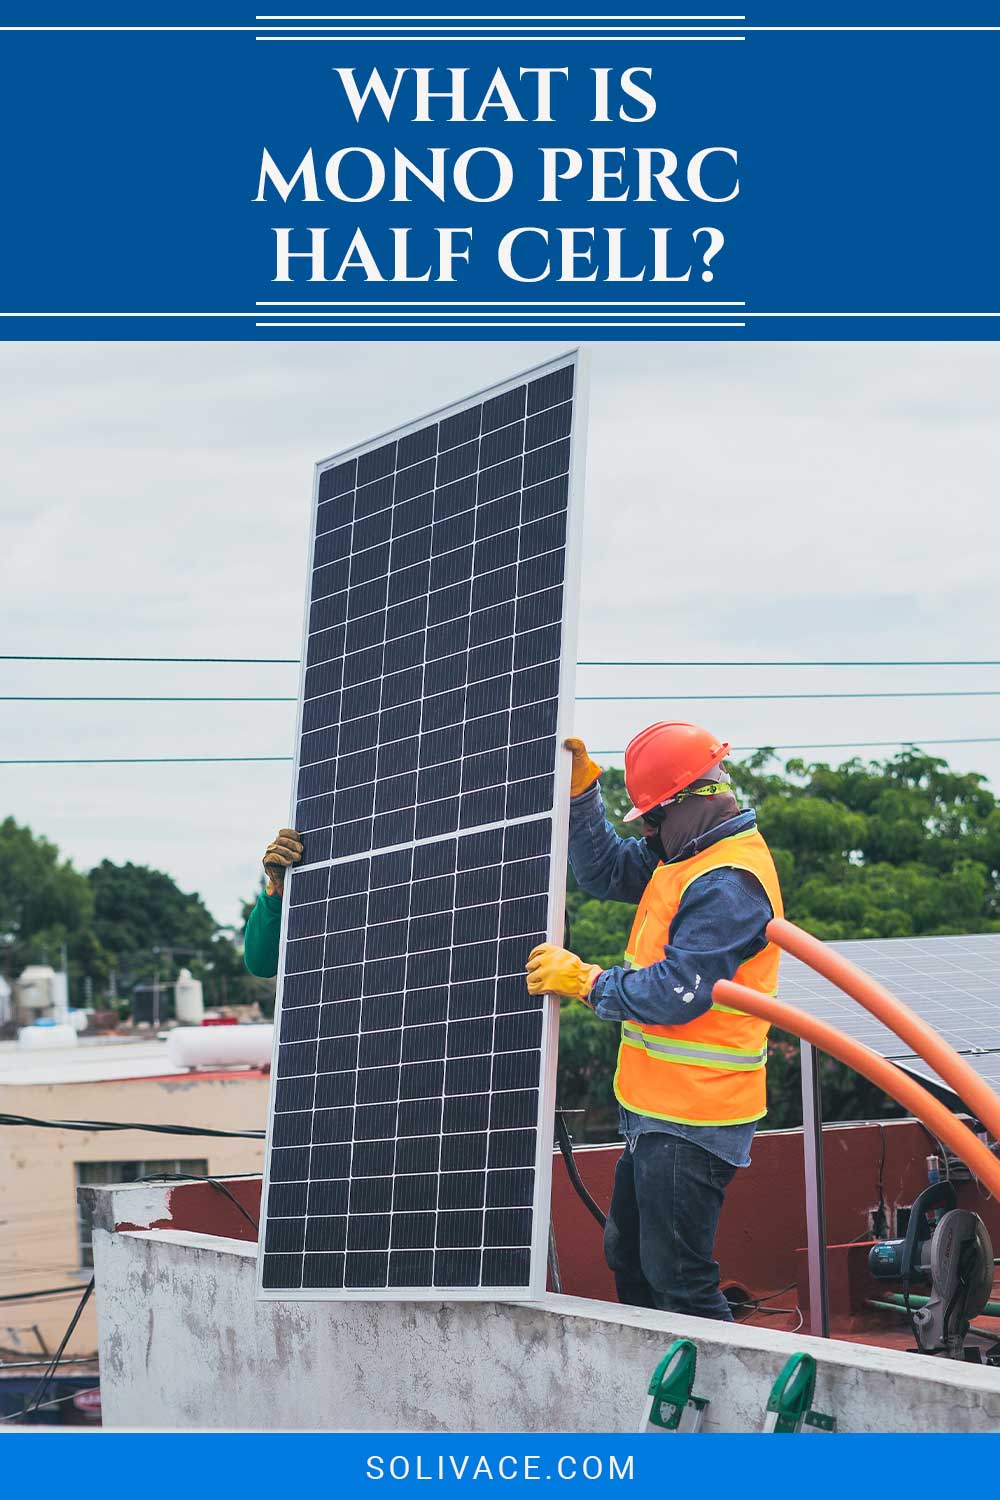 Workers with a solar panel in their hands - What Is Mono Perc Half Cell?